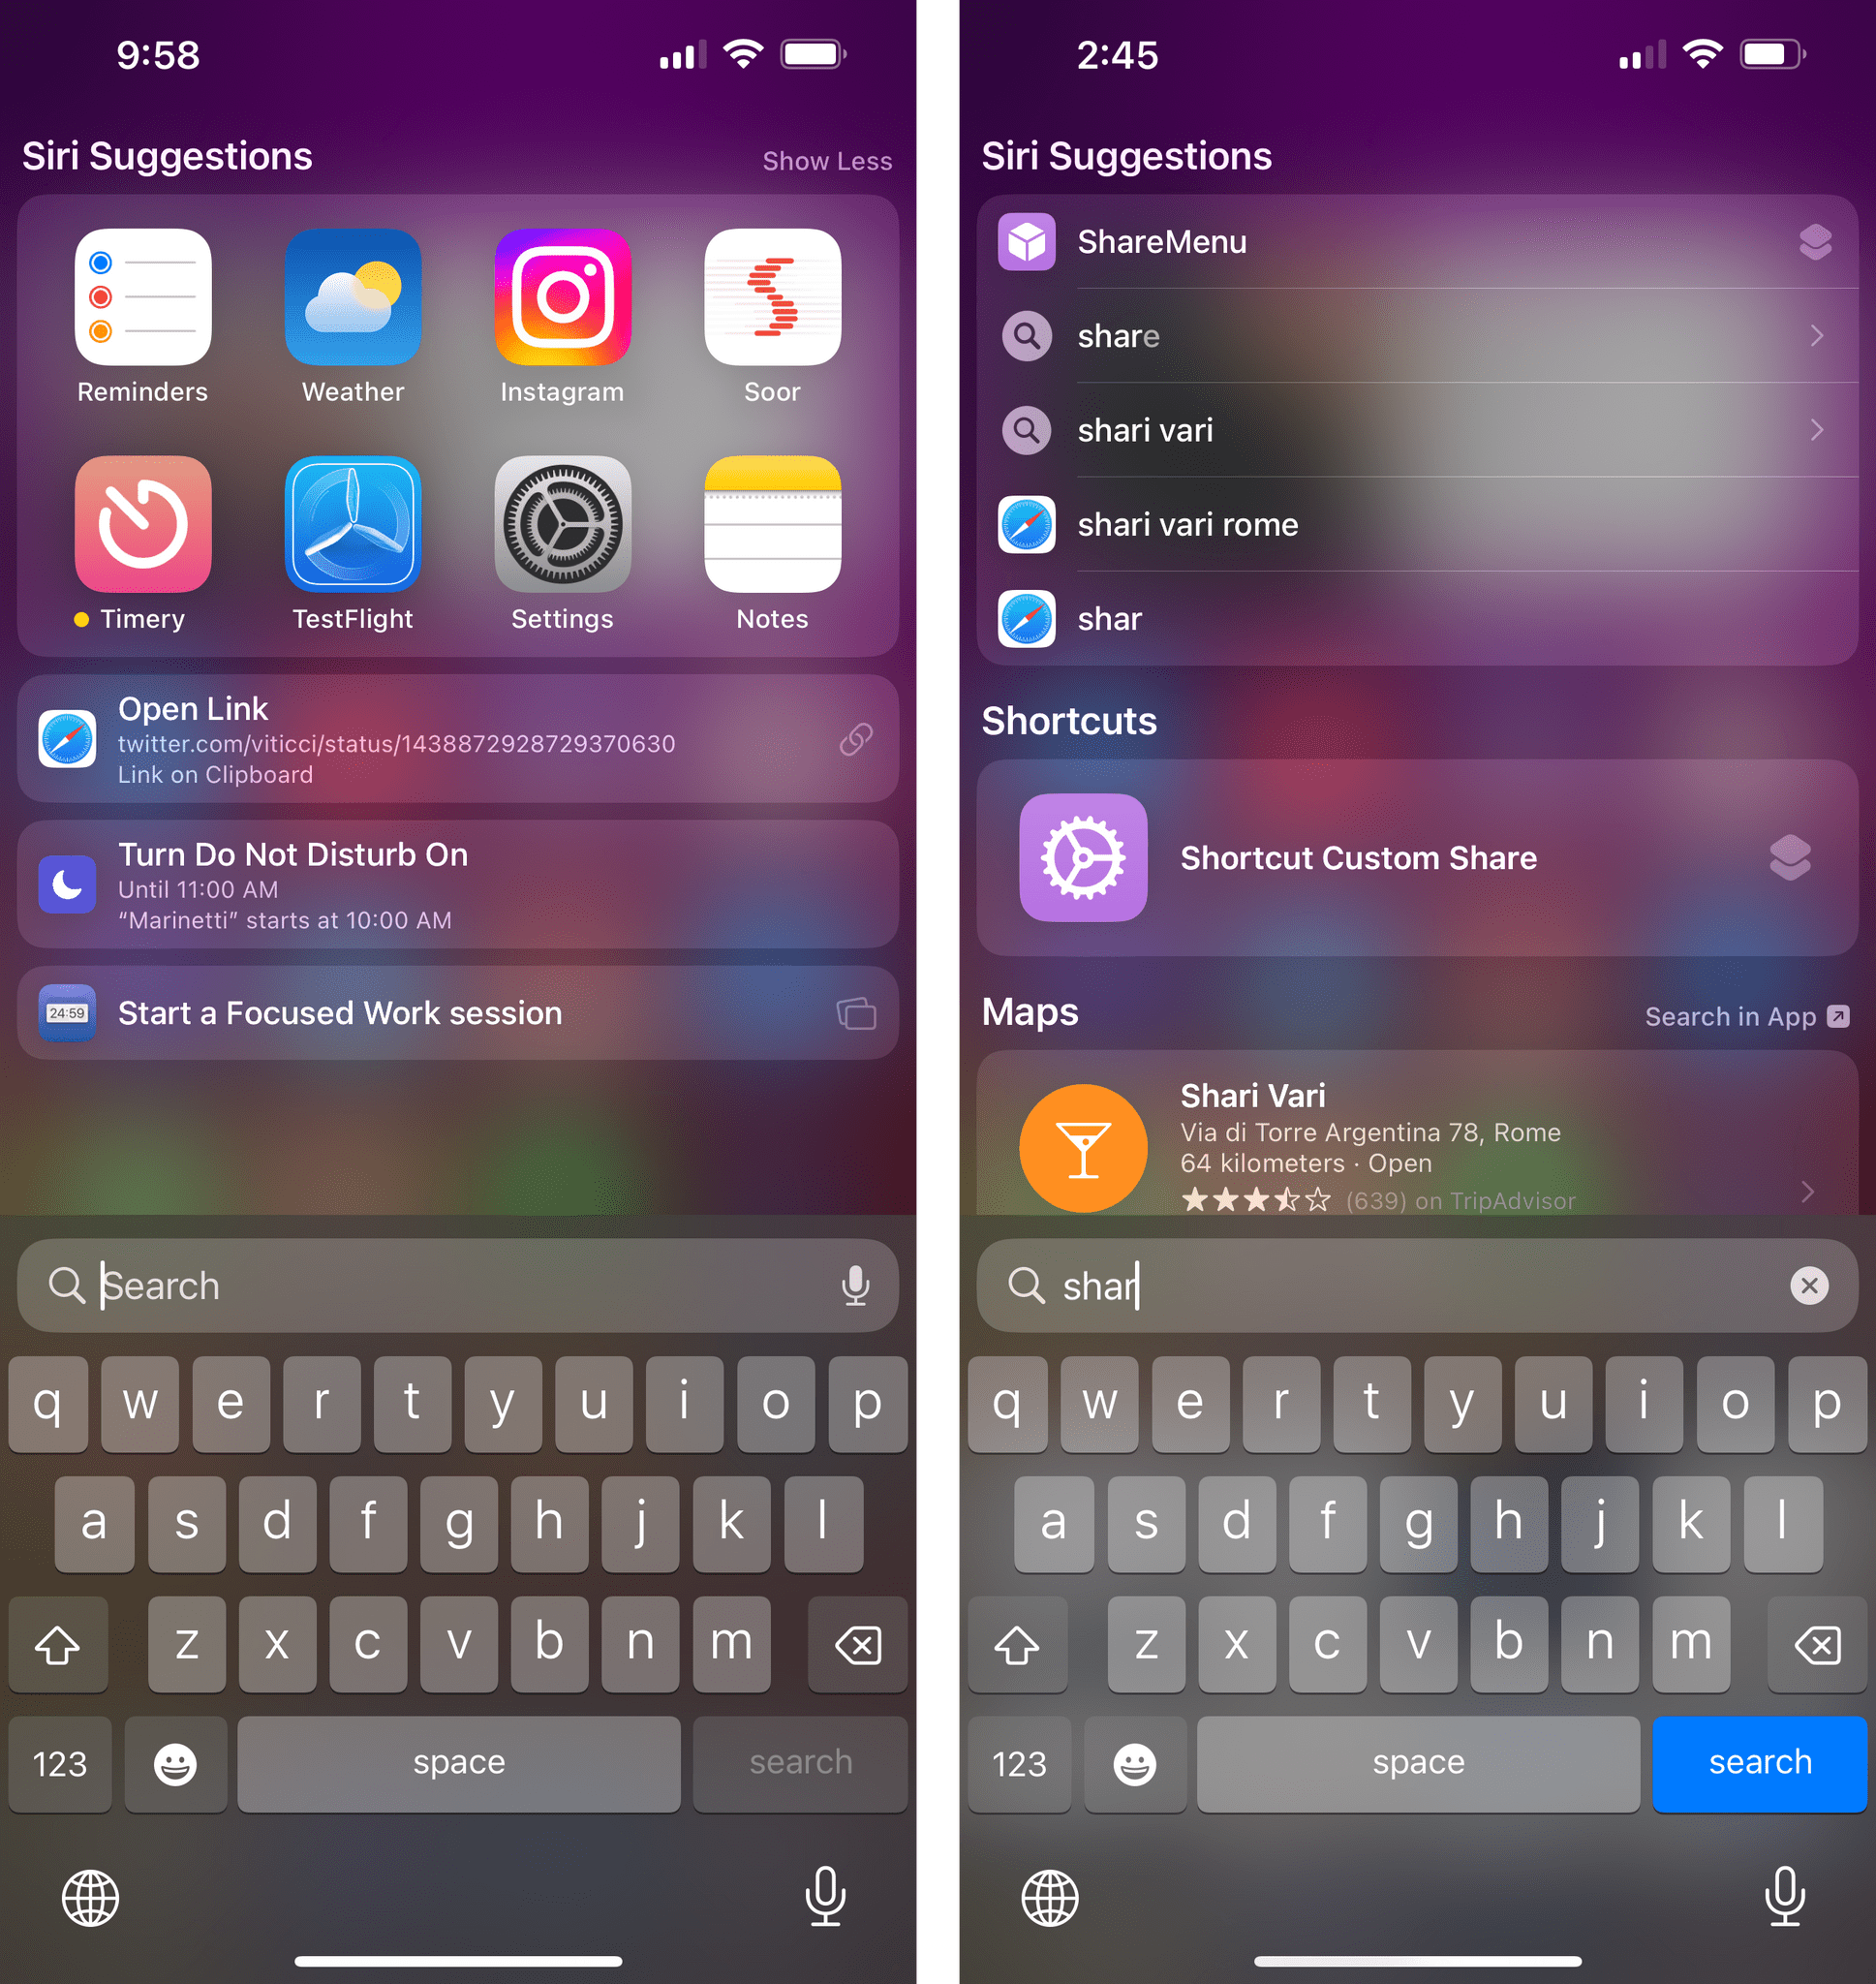 Spotlight in iOS 16 seems to suggest shortcuts more often.